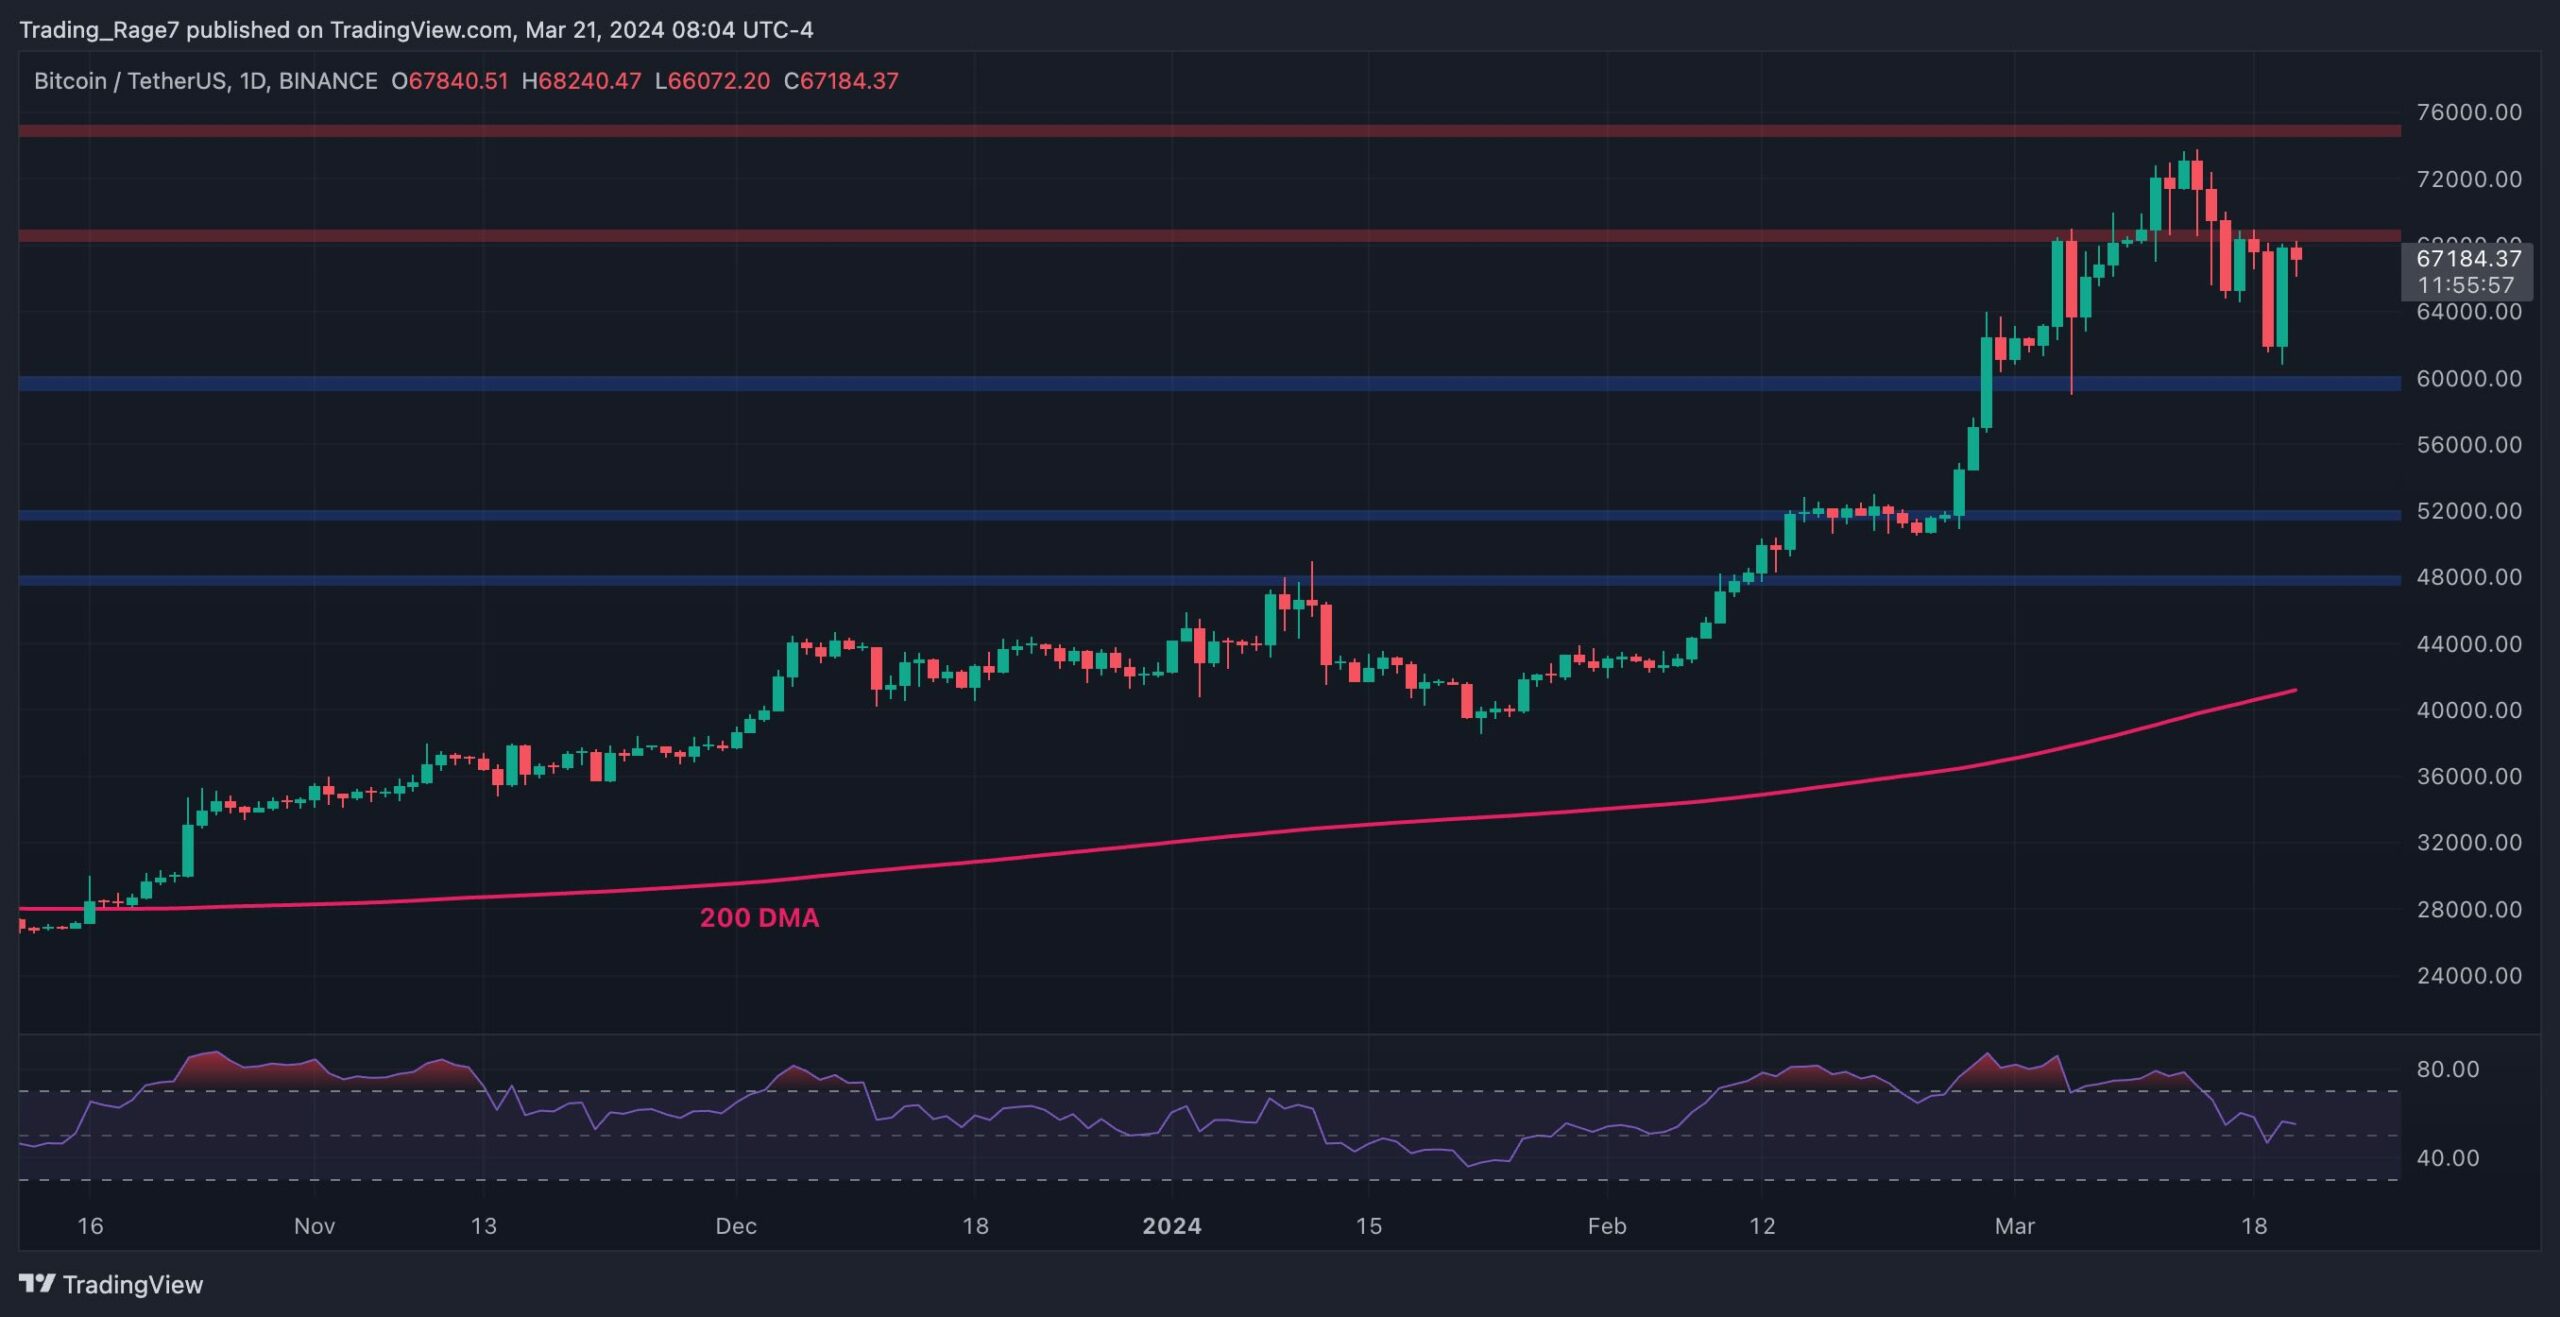 Bitcoin Price Analysis: Is BTC Ready to Explode to a New ATH Following the Recent Correction?